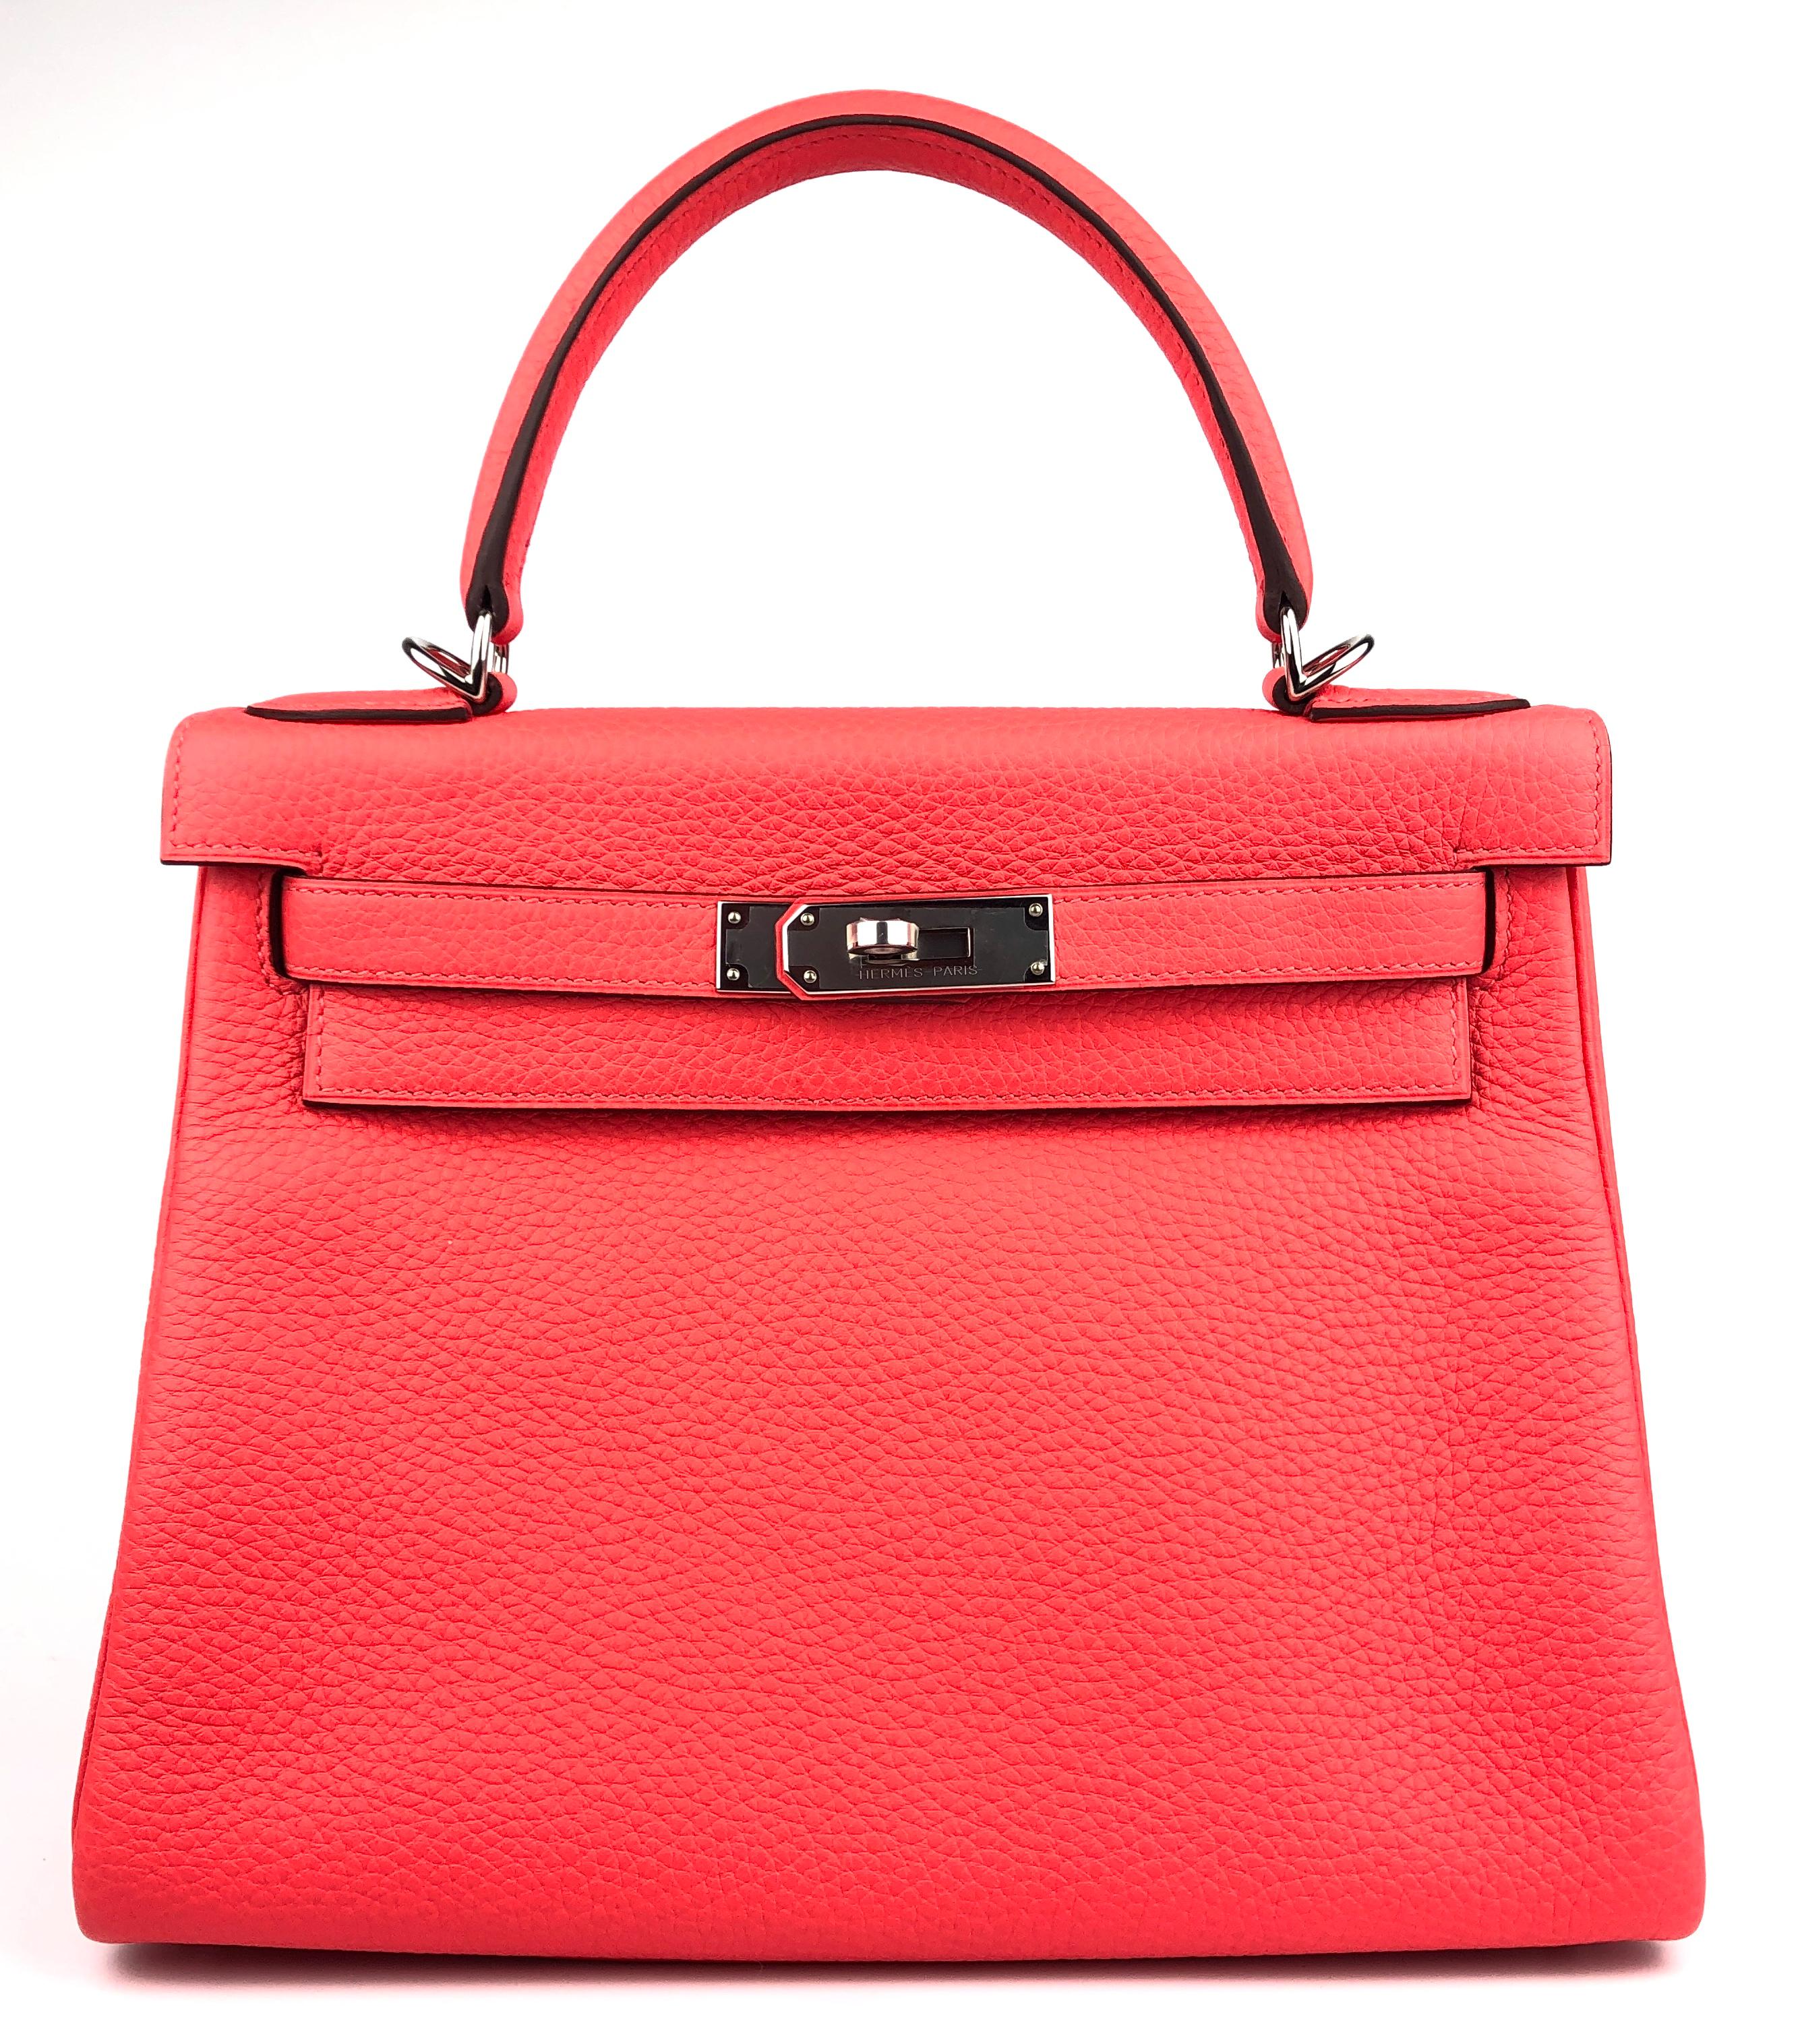 Rare Stunning 2020 As New Hermes Kelly 28 Rose Texas Leather Palladium. As New with plastic on all Hardware and feet! 

Shop with Confidence from Lux Addicts. Authenticity Guaranteed! 

Lux Addicts is a Premier Luxury Dealer and one of the most